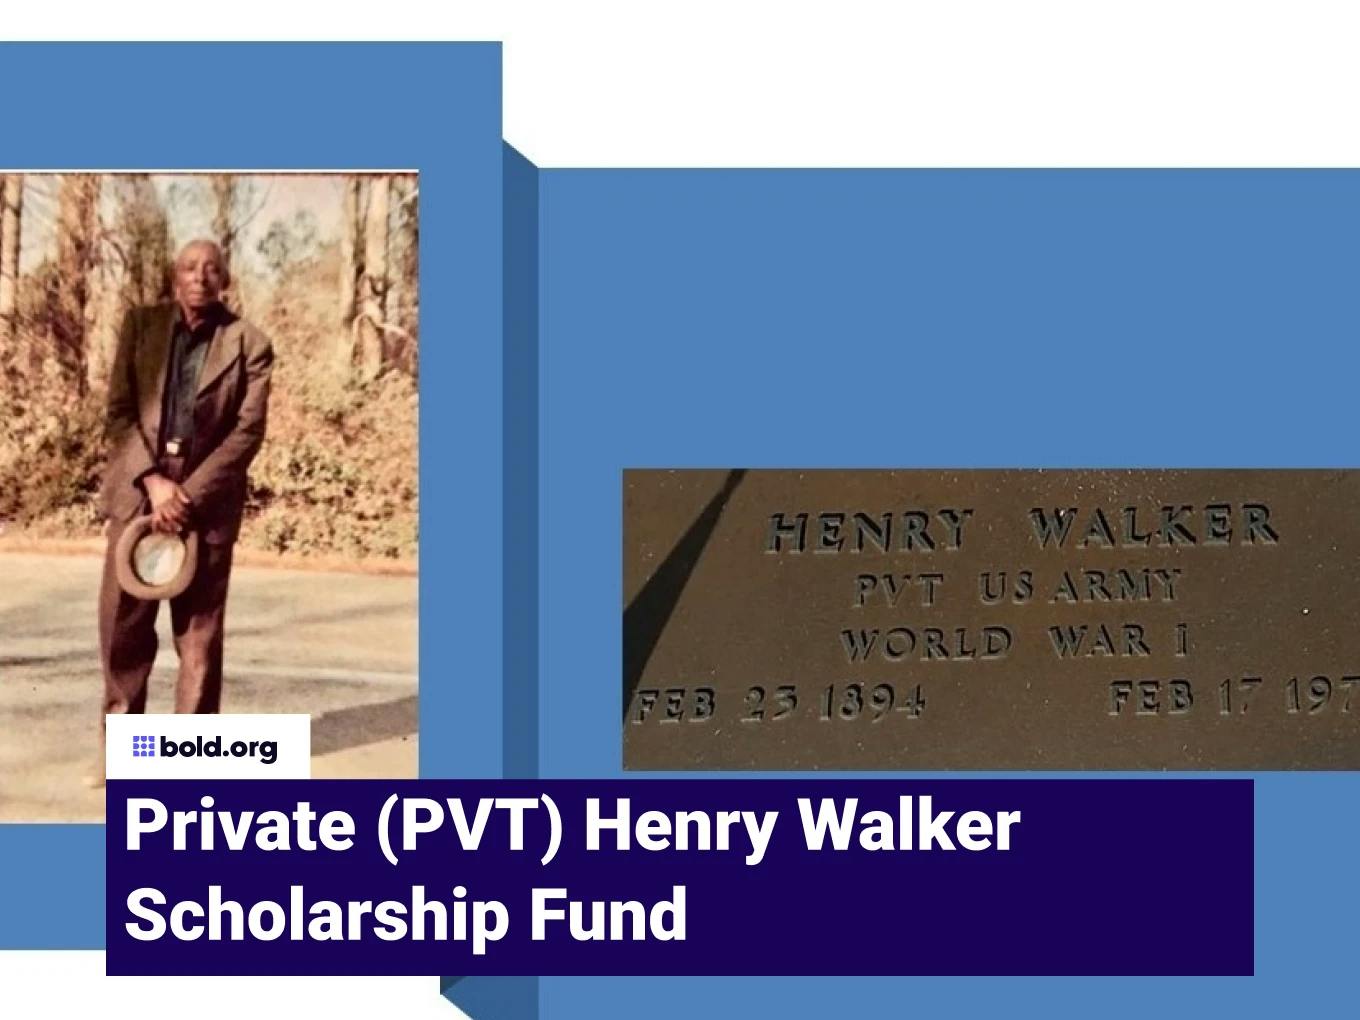 Private (PVT) Henry Walker Scholarship Fund